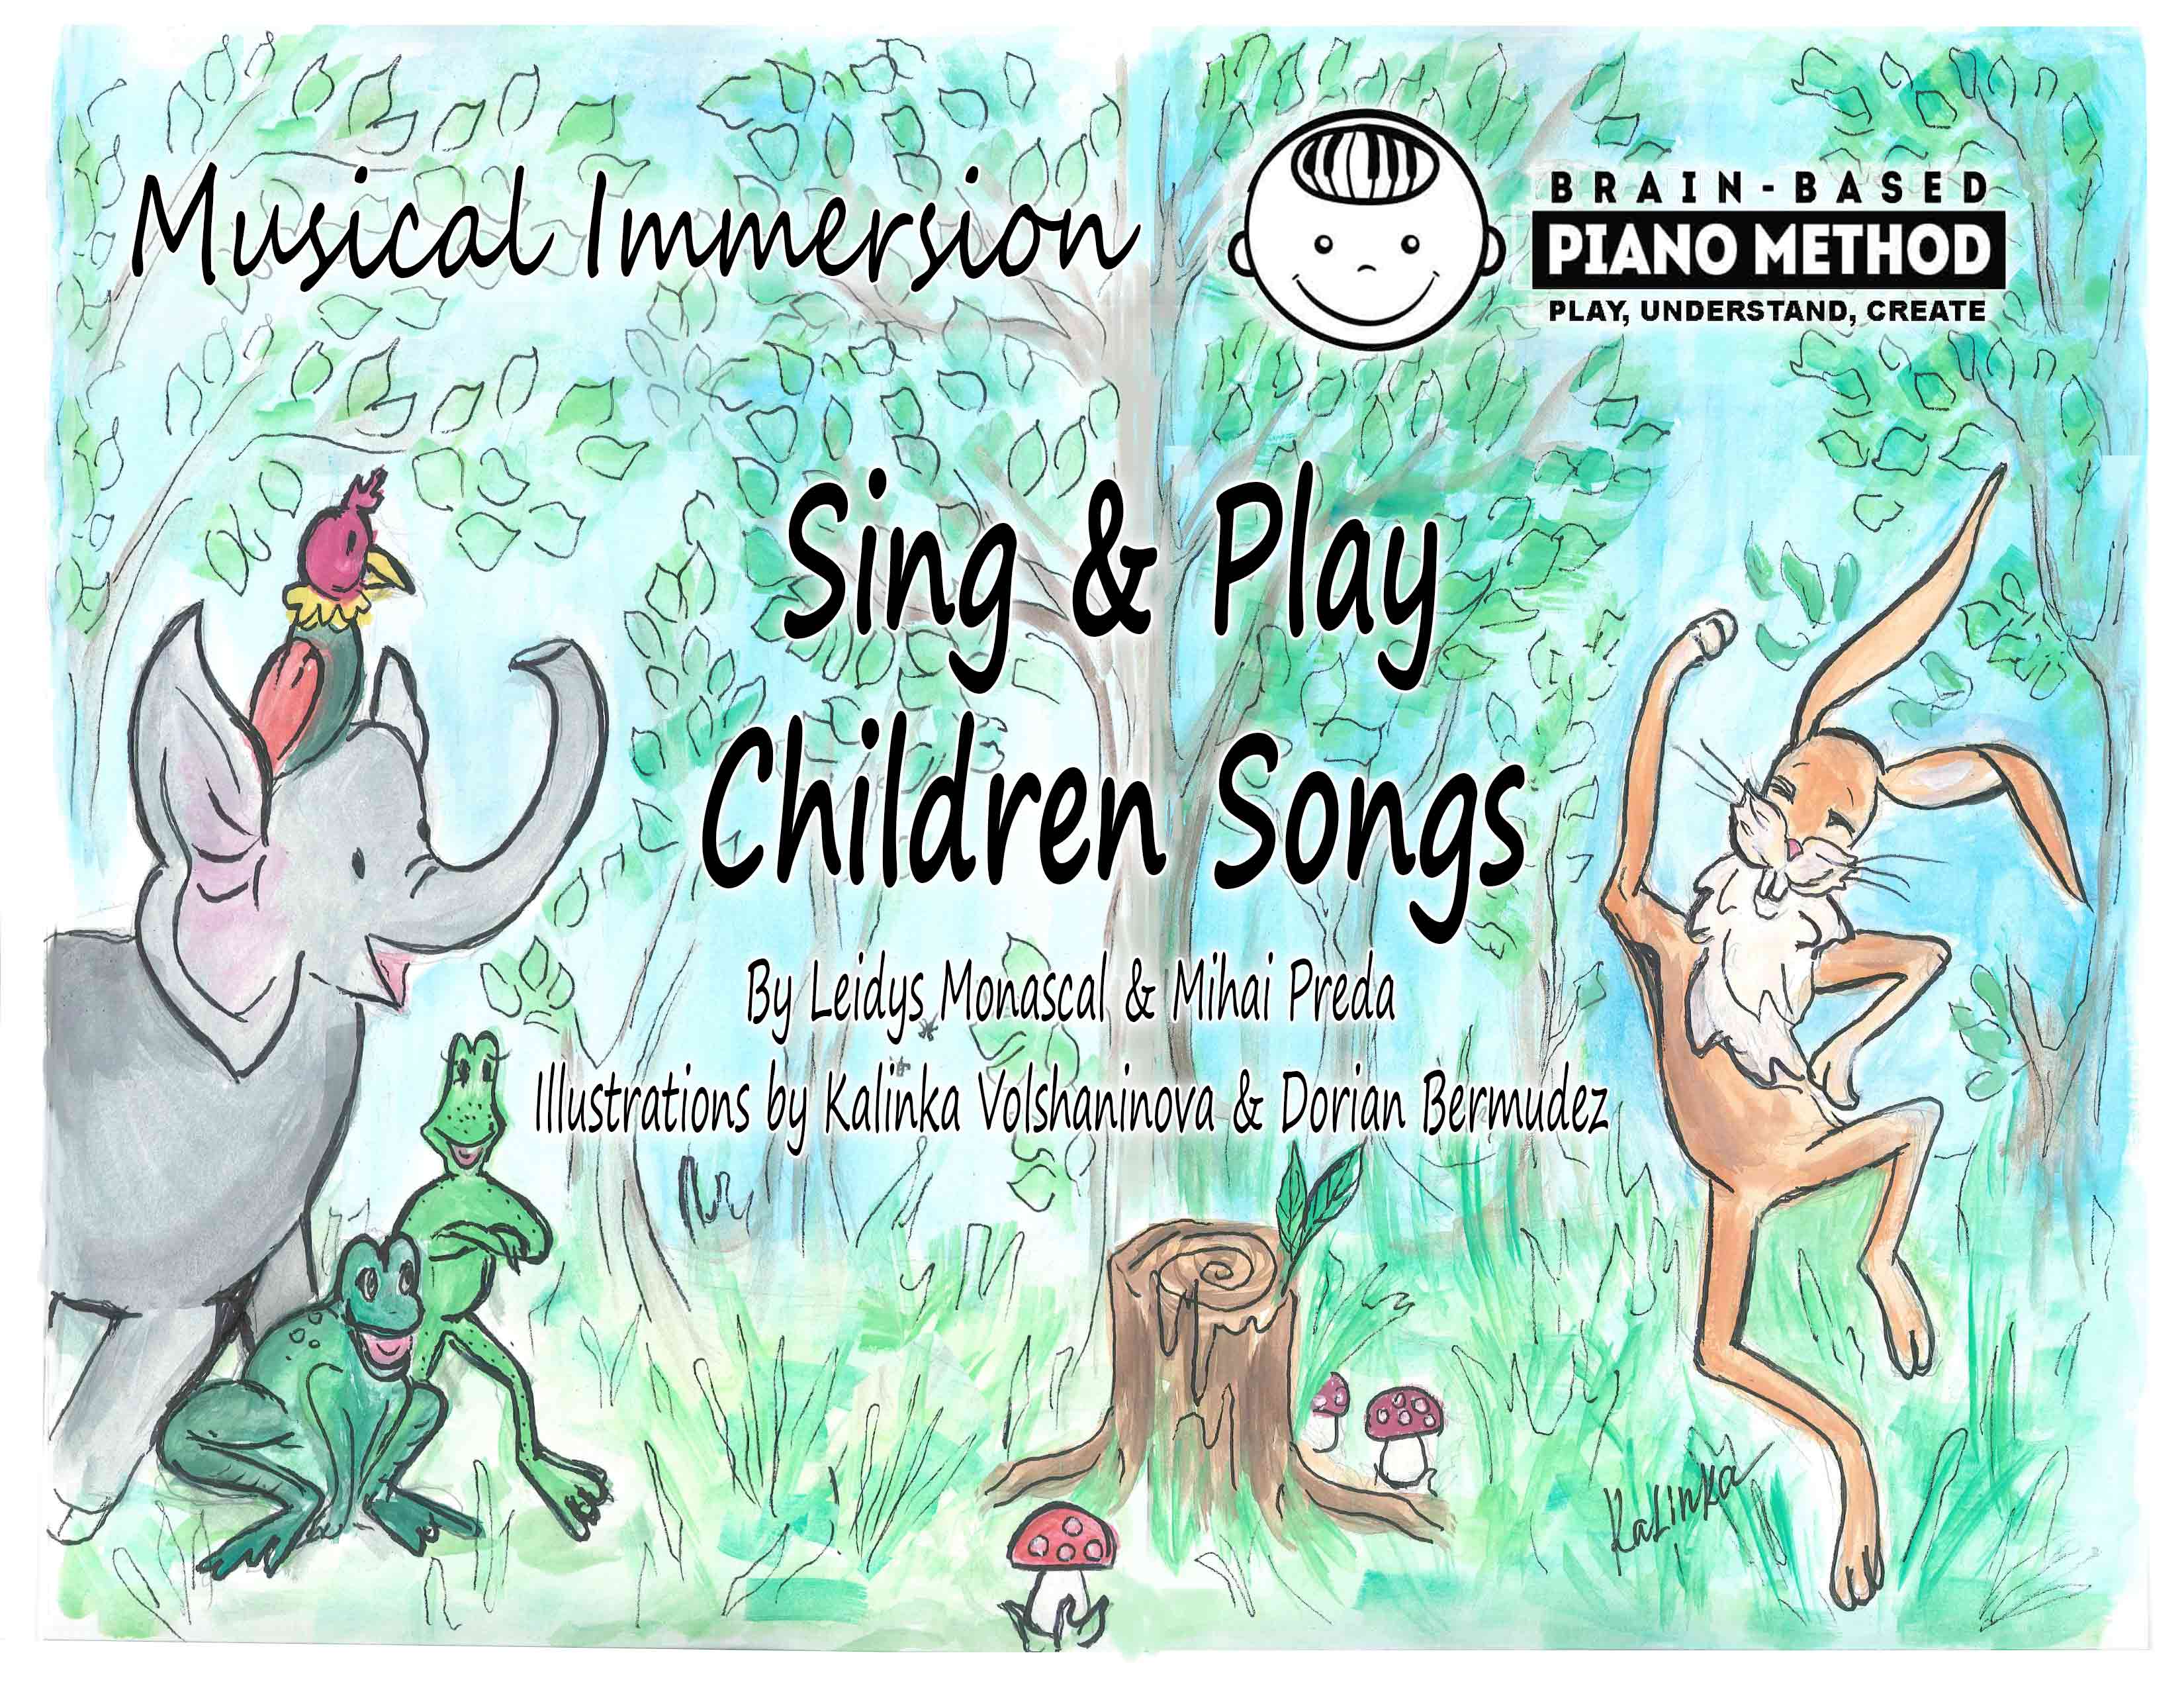 Songs and Play Children Songs